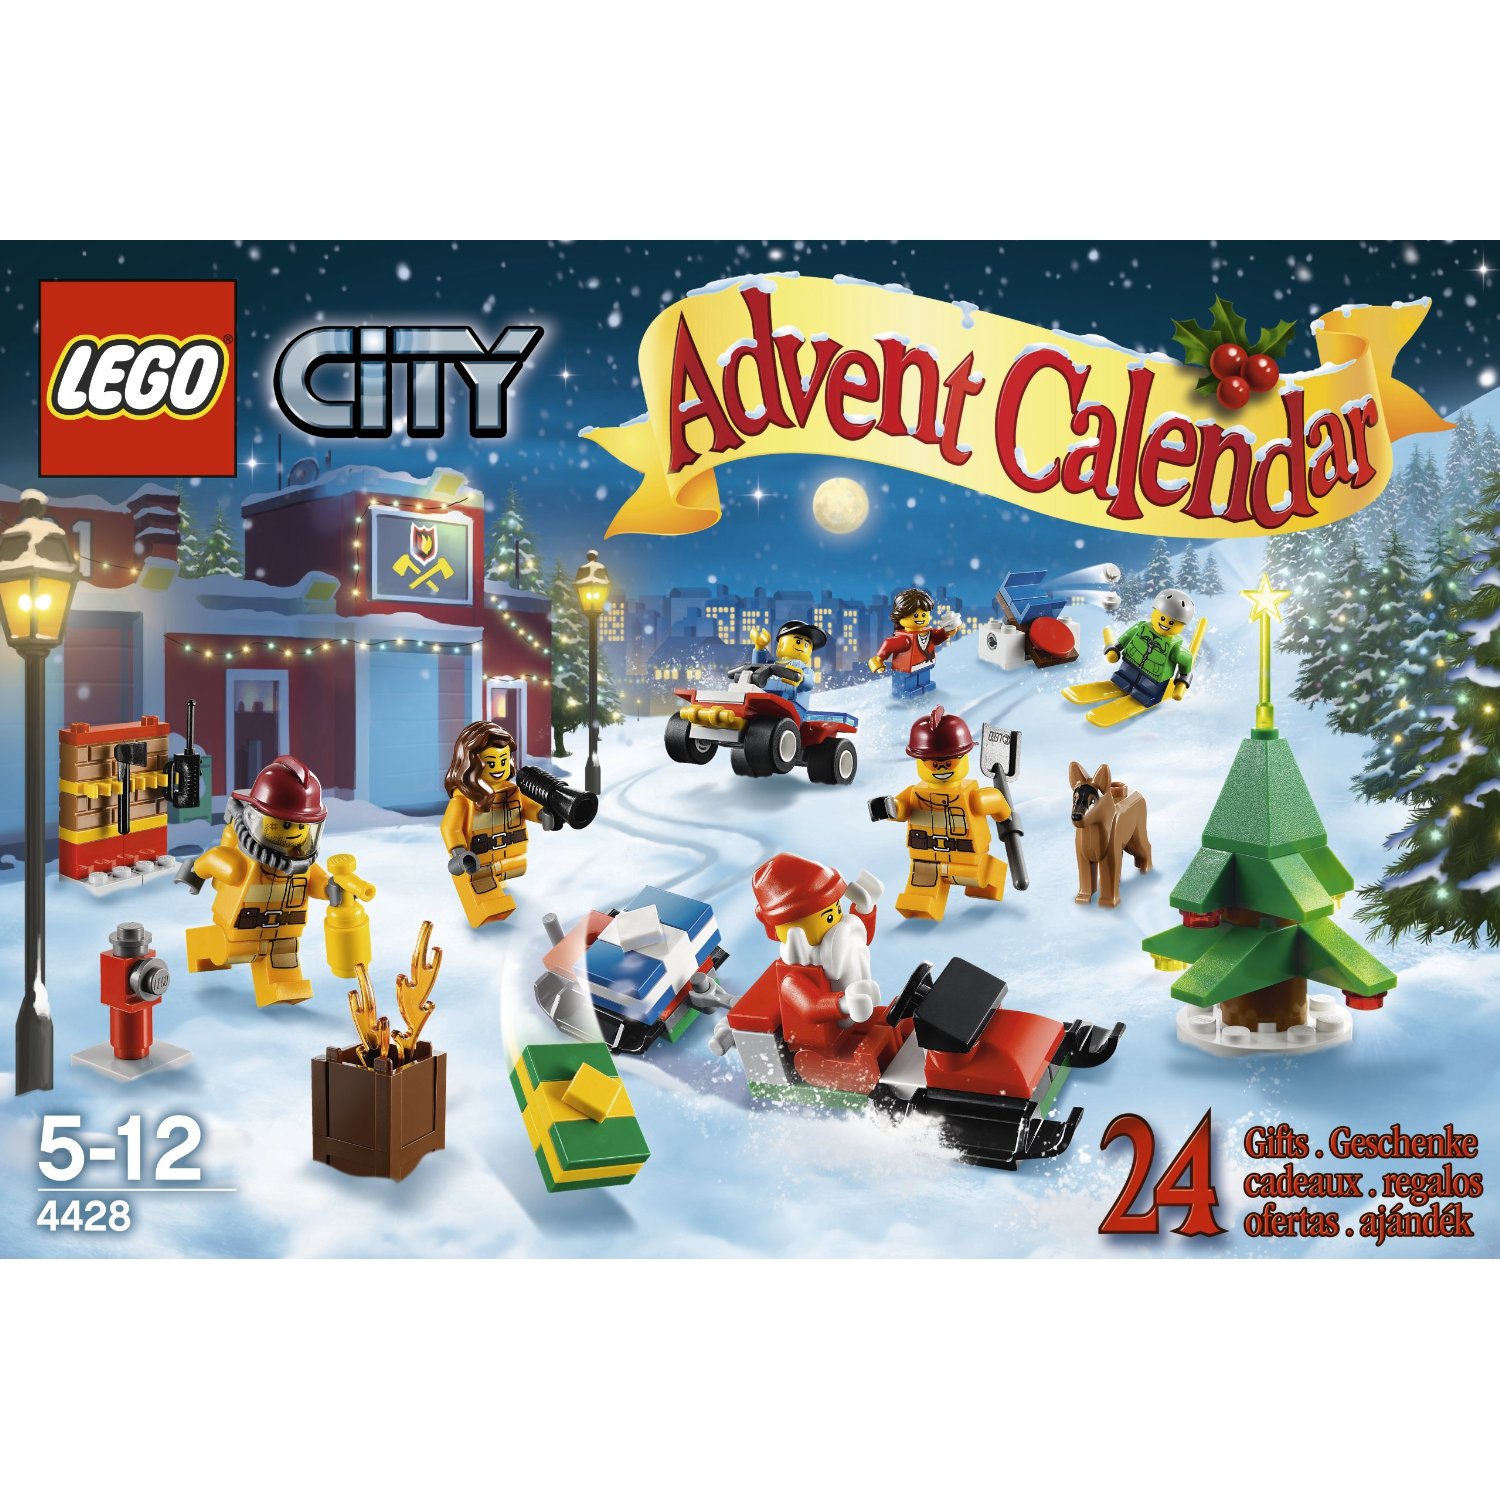 amazon-hot-price-for-the-lego-advent-calendar-down-to-only-29-97-shipped-living-chic-mom